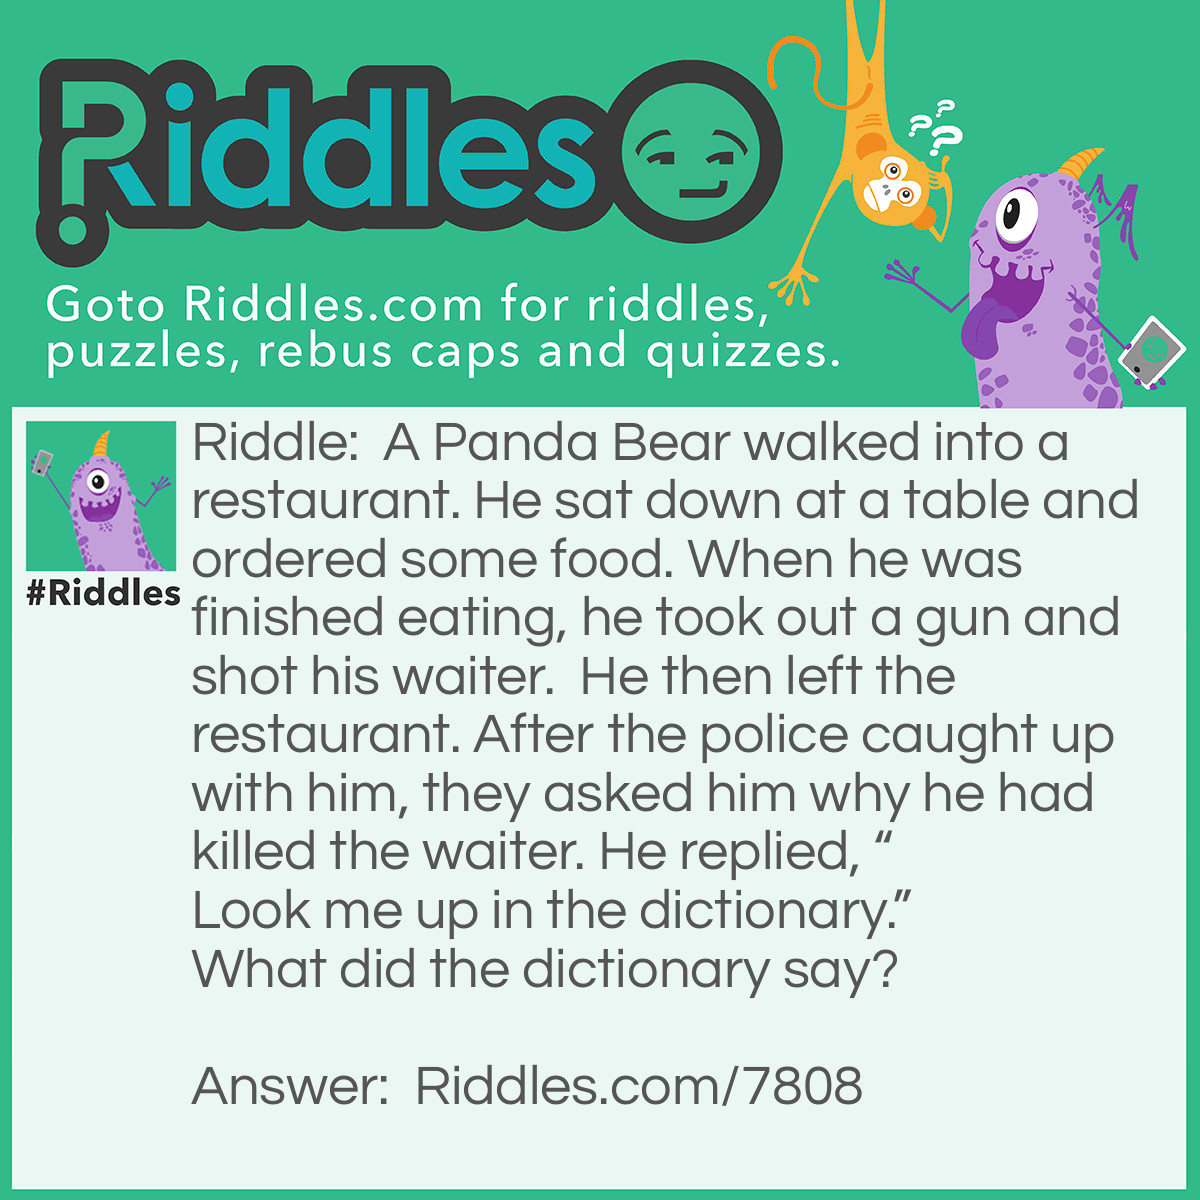 Riddle: A Panda Bear walked into a restaurant. He sat down at a table and ordered some food. When he was finished eating, he took out a gun and shot his waiter. He then left the restaurant. After the police caught up with him, they asked him why he had killed the waiter. He replied, "Look me up in the dictionary." What did the dictionary say? Answer: When they looked up the word "Panda" in the dictionary, it stated, "Panda: Eats shoots and leaves."